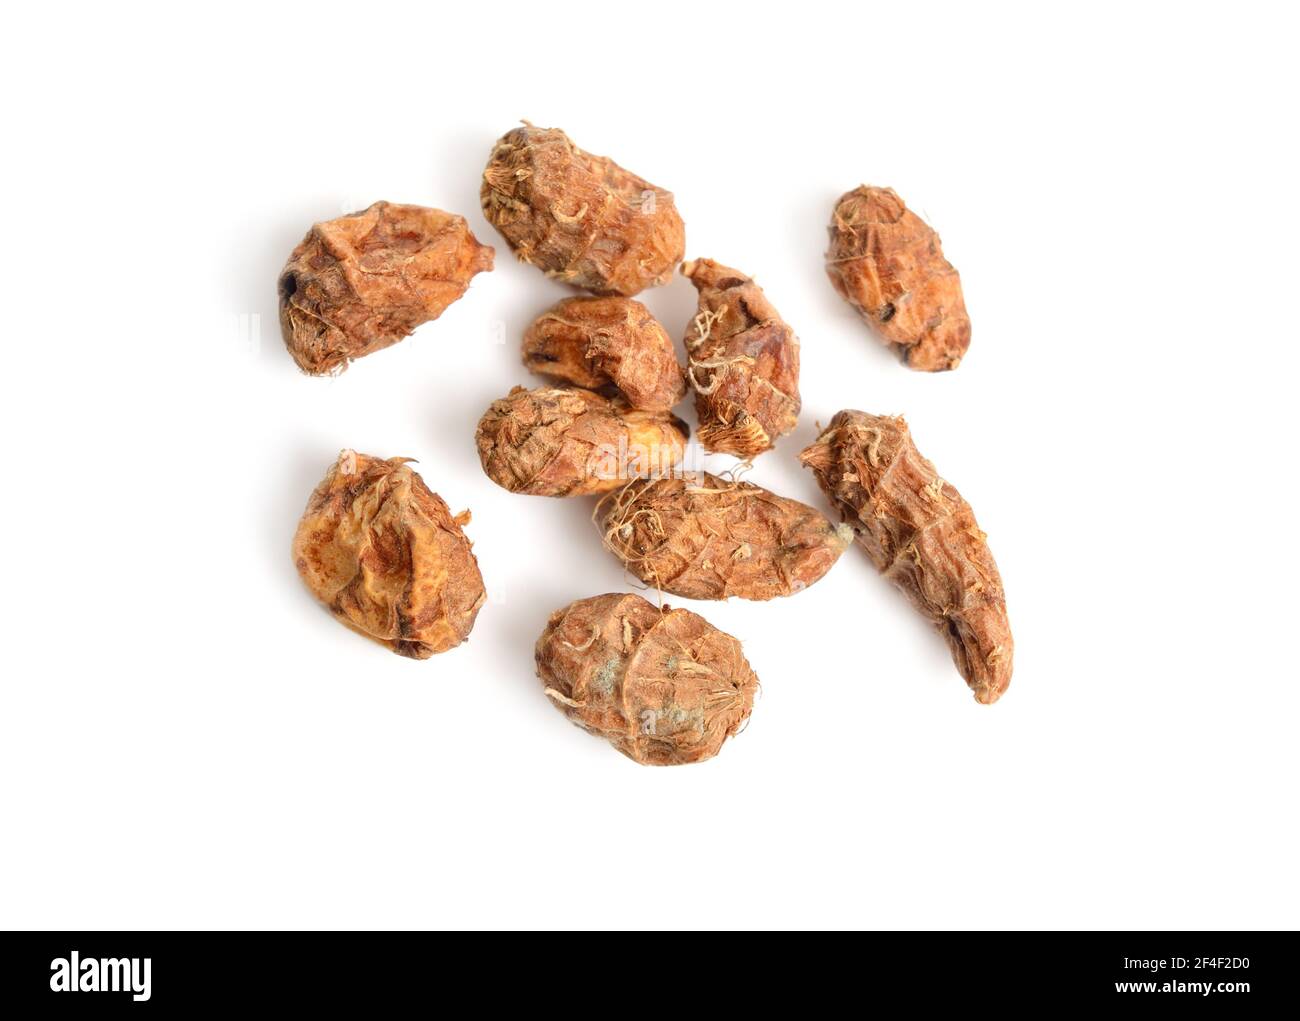 Dried tubers Cyperus esculentus also called chufa, tiger nut, atadwe, yellow nutsedge, and earth almond. Isolated Stock Photo